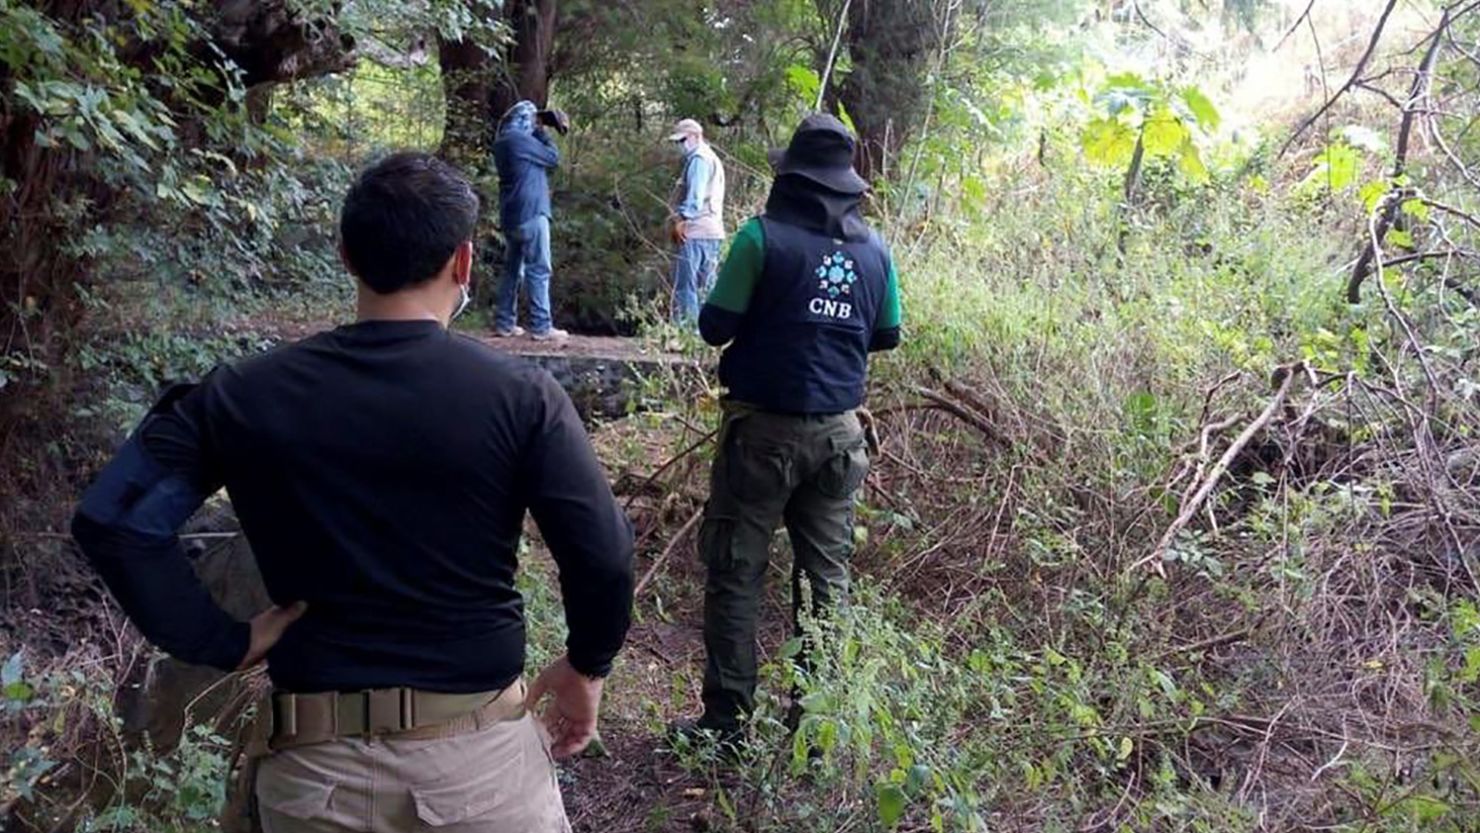 Members of Mexico's National Commission for the Search of Persons (CNBP) pictured searching a site in the town of Salvatierra.